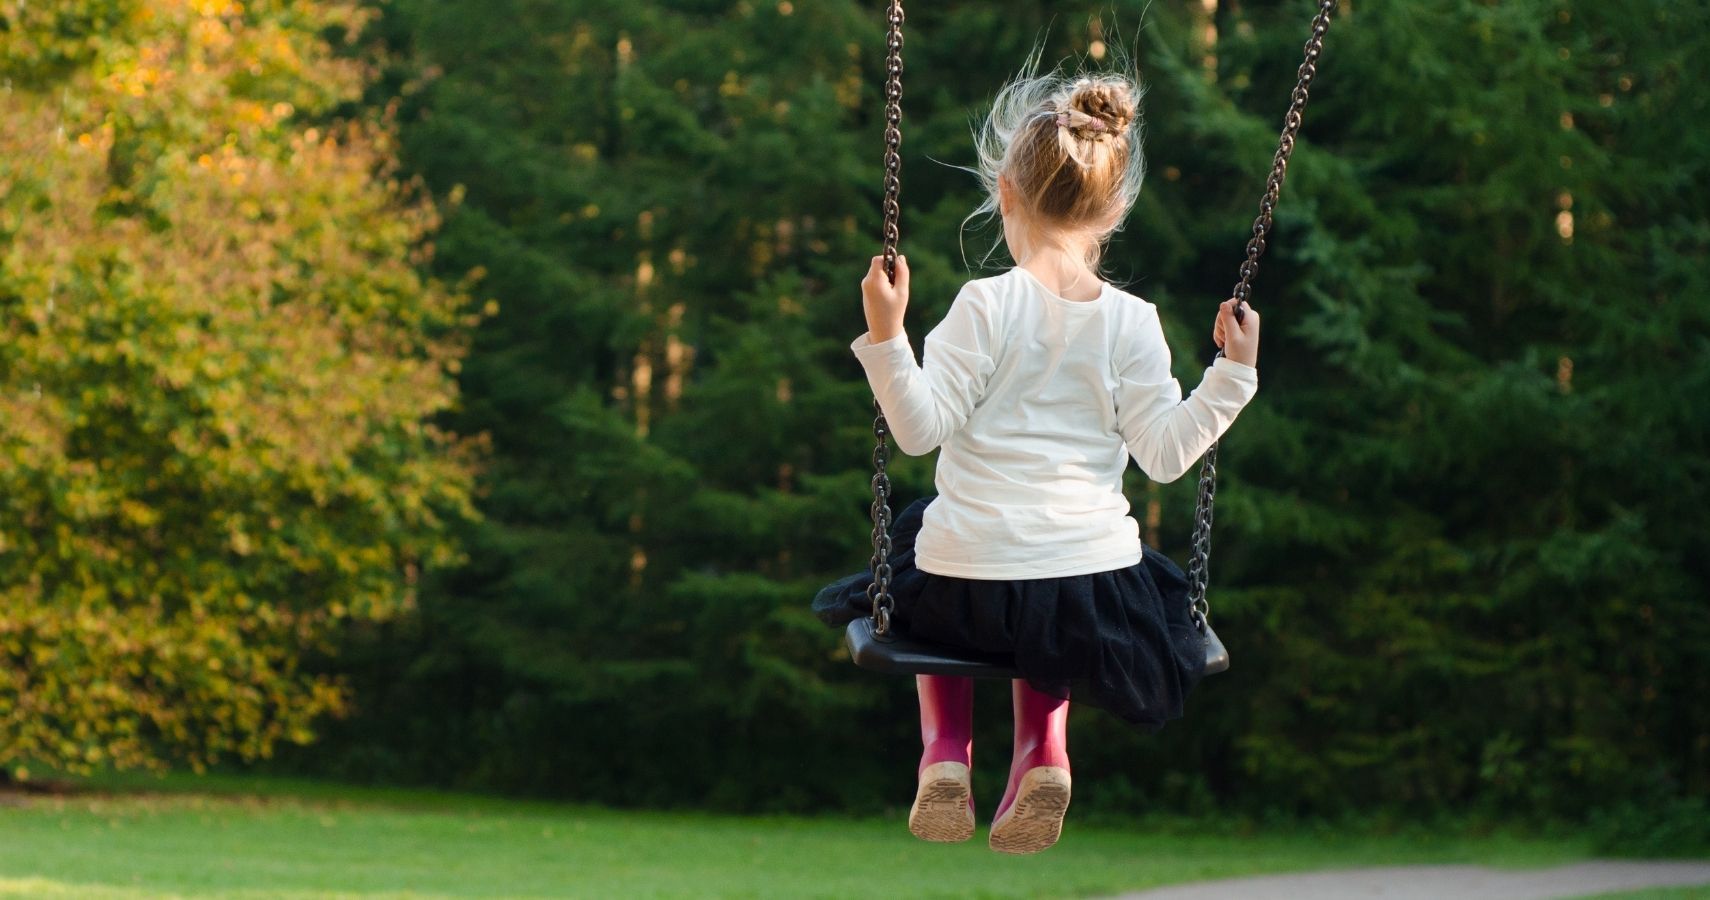 The 5 Best Songs About Your Child Growing Up That Are Too Relatable